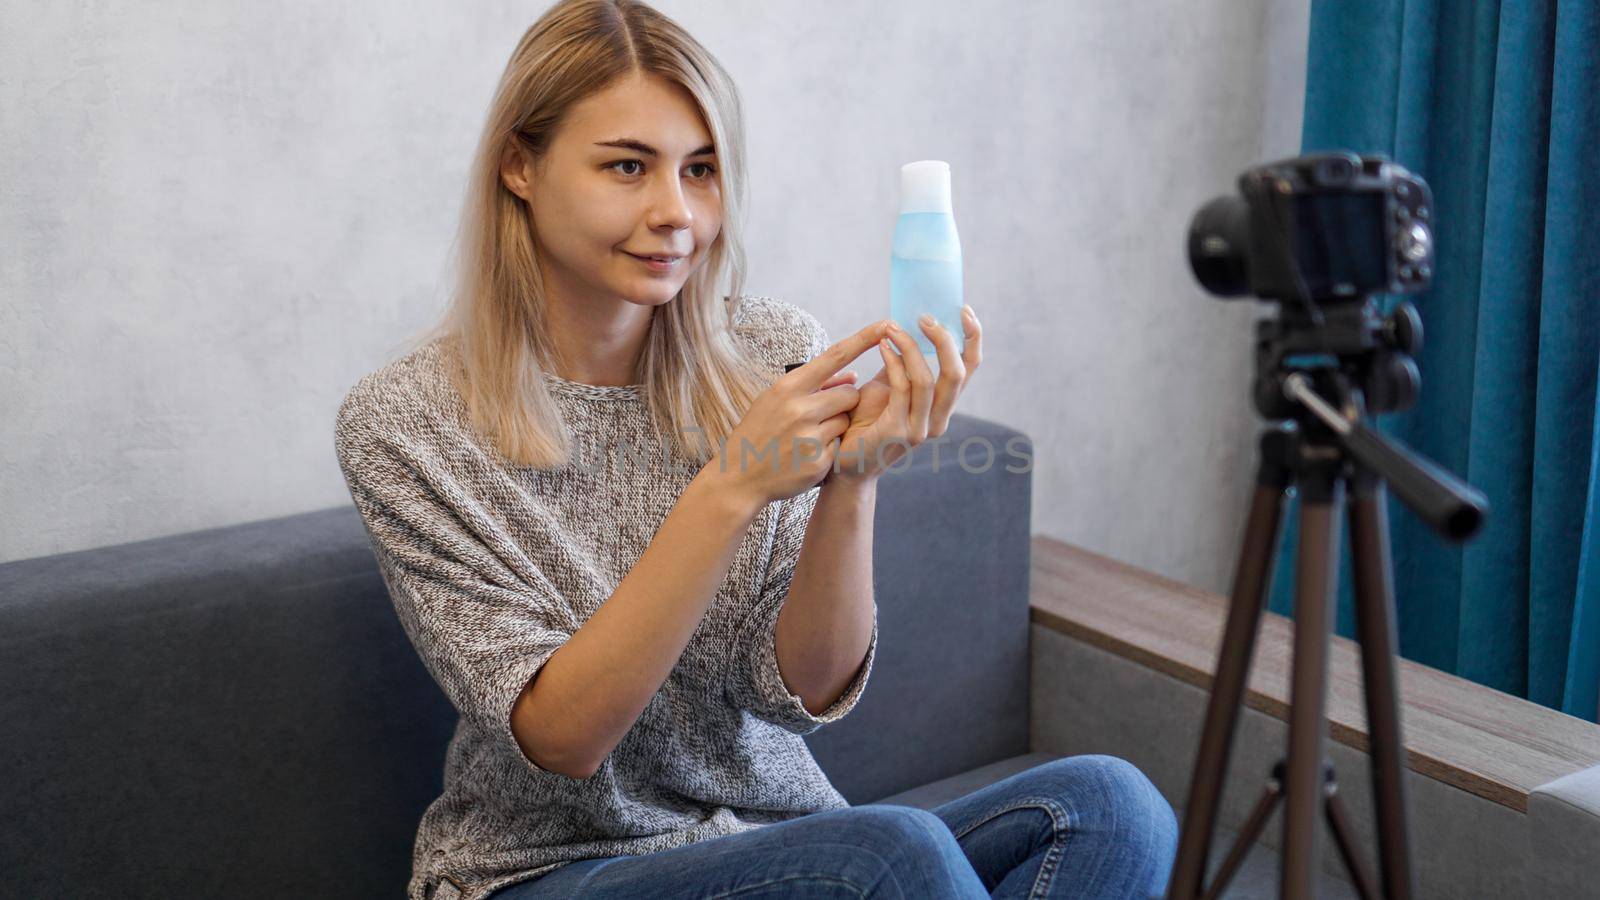 Cheerful female beauty blogger recording video at home. She shows lotion for skin.